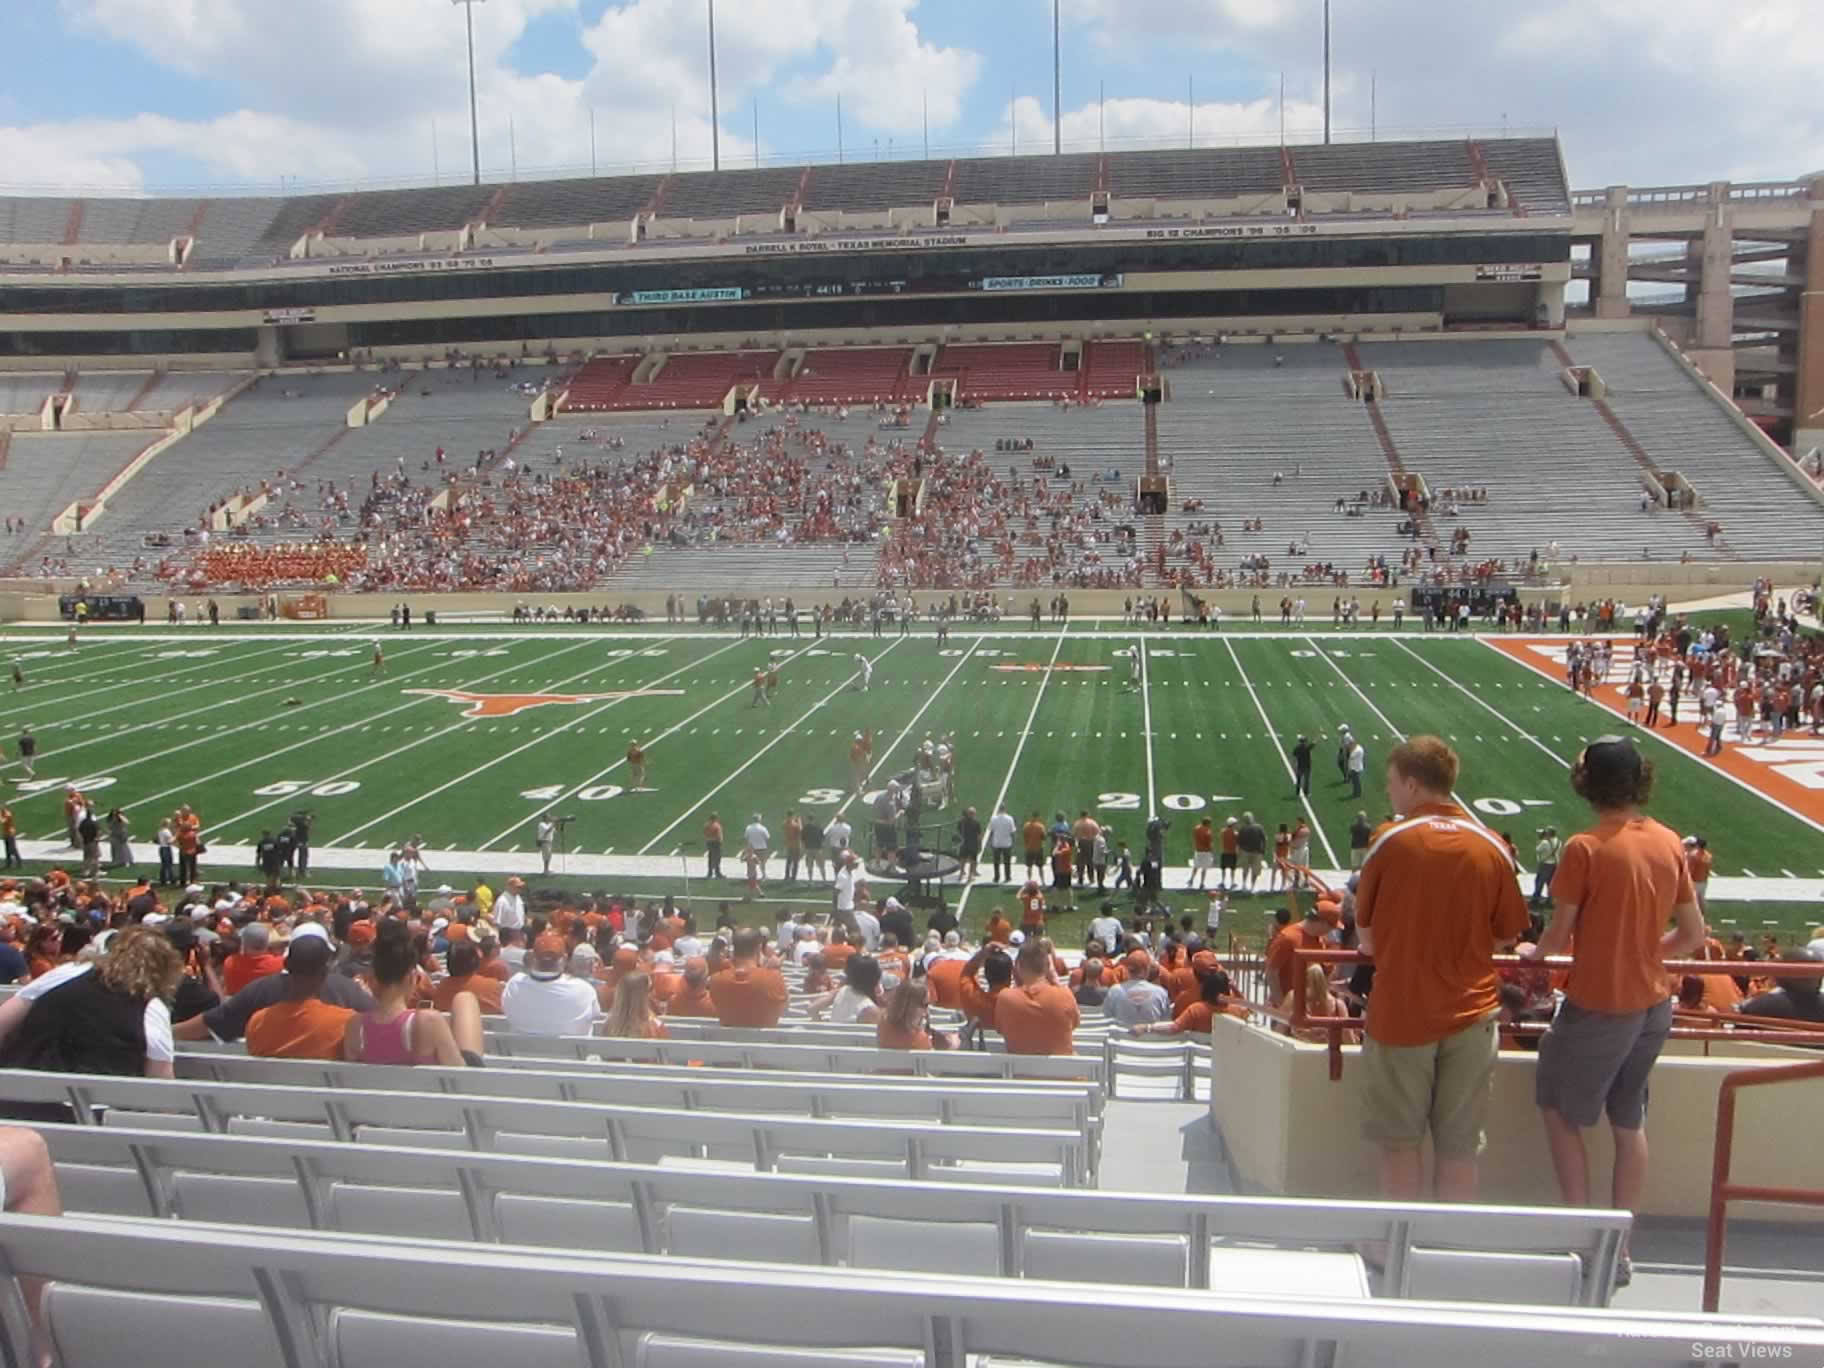 section 3, row 30 seat view  - dkr-texas memorial stadium